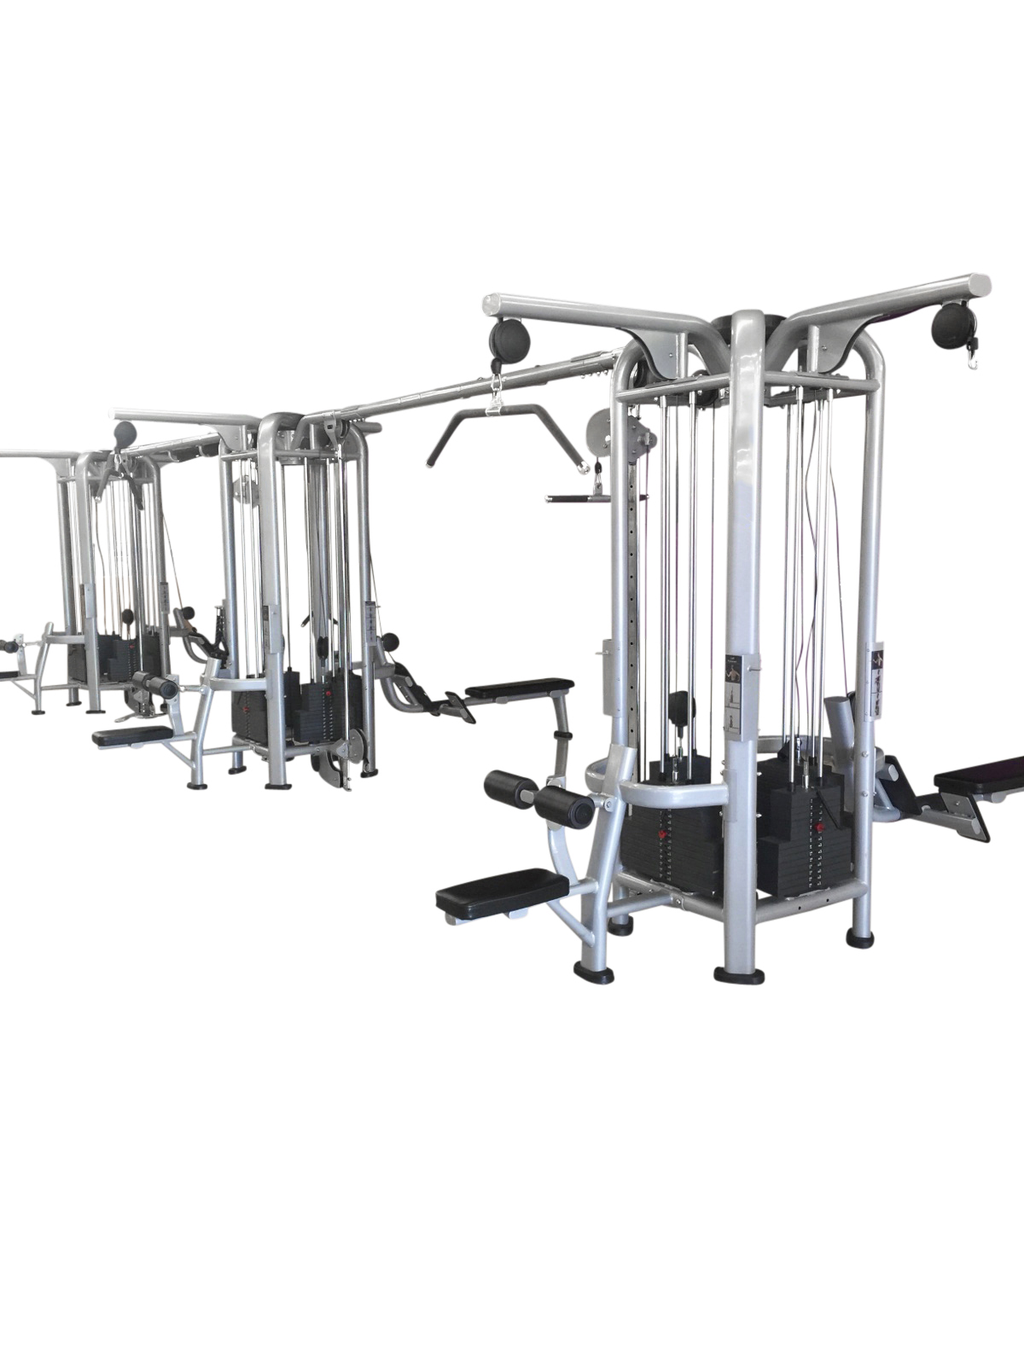 Deluxe 12 Stack Jungle Gym Version A - Muscle D